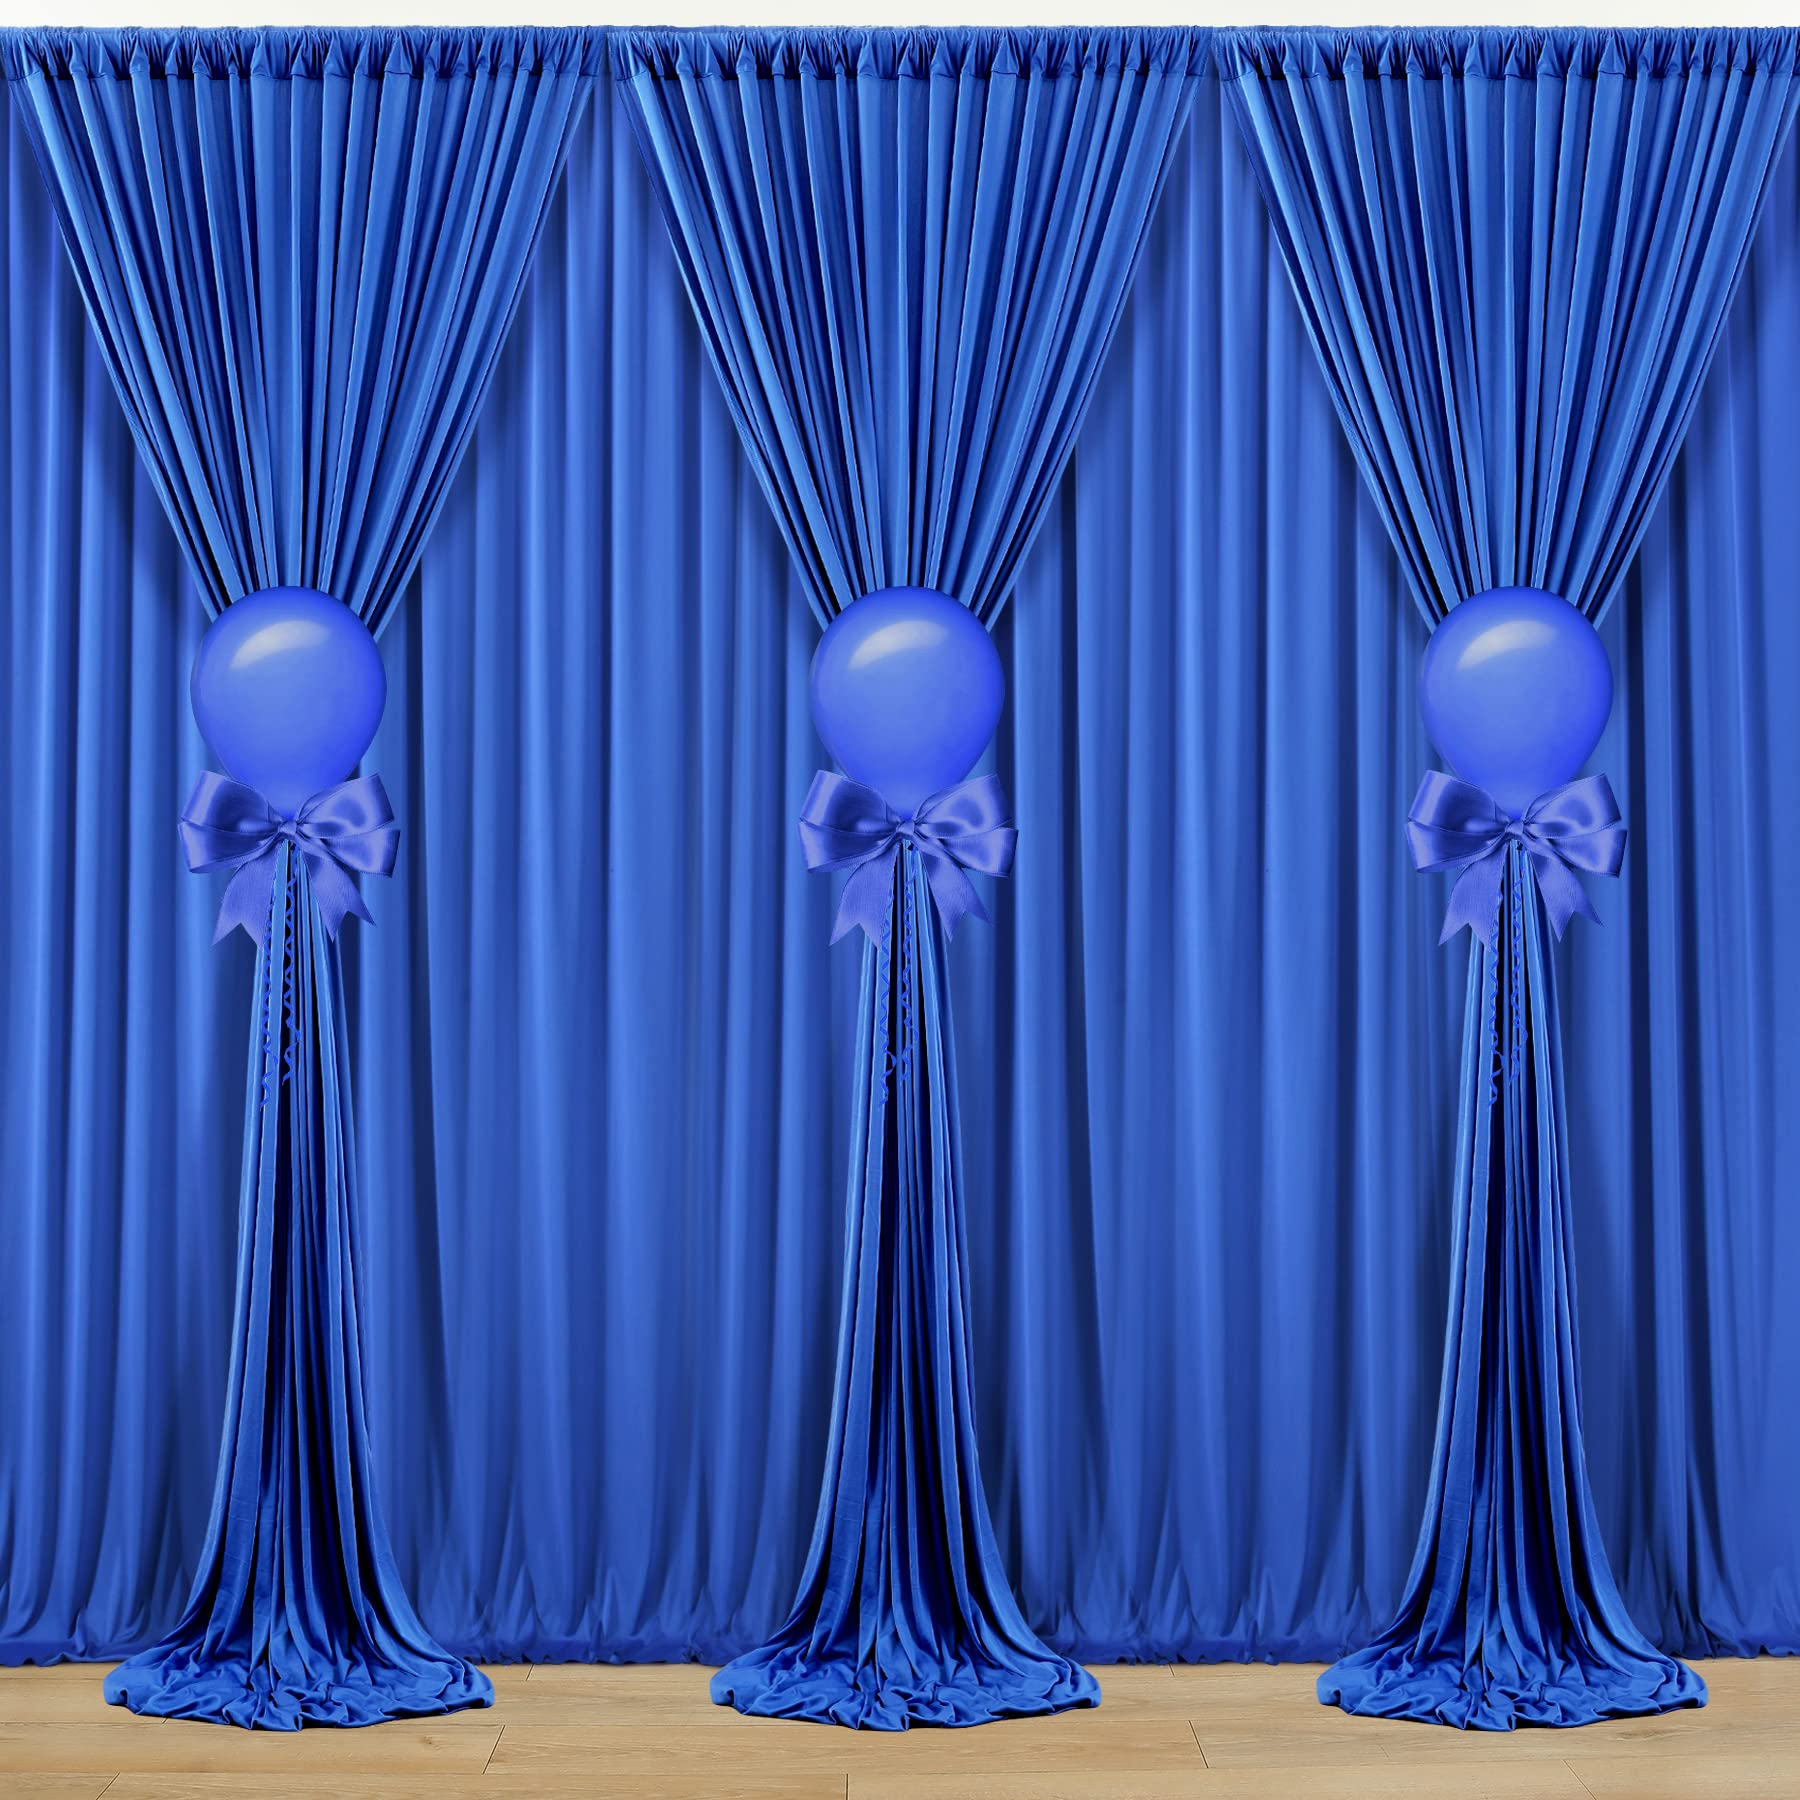 Outpain 10 Ft X 20 Ft Wrinkle Free Royal Blue Backdrop Curtain Panels, Polyester Photography Backdrop Drapes, Wedding Party Home Decorat